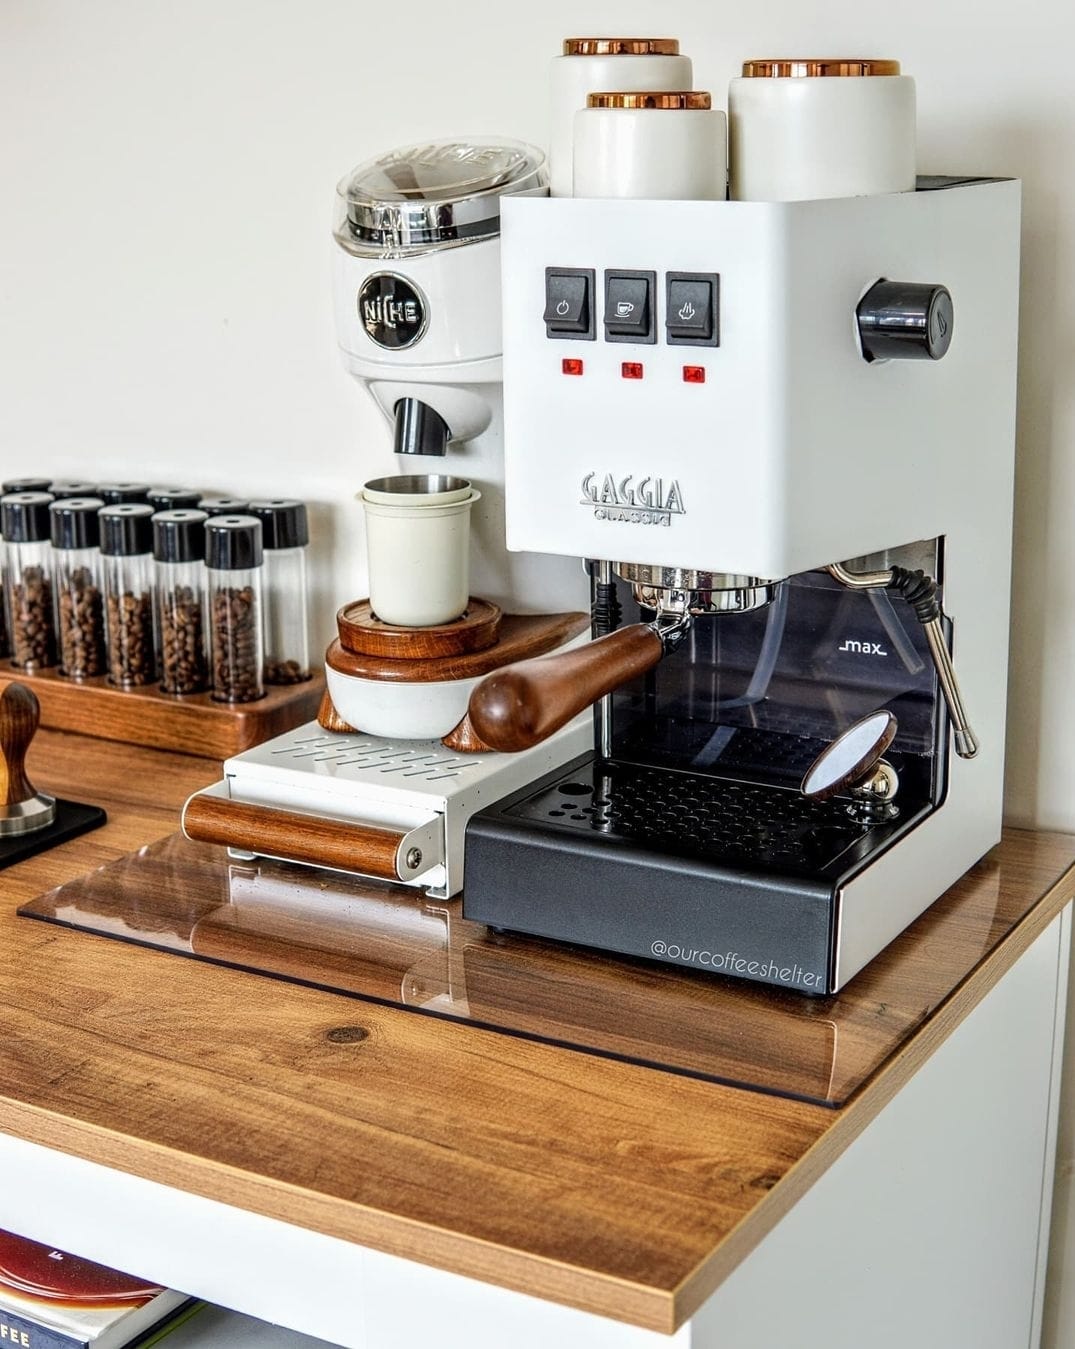 Gaggia Classic Pro boasts a more stable heating system